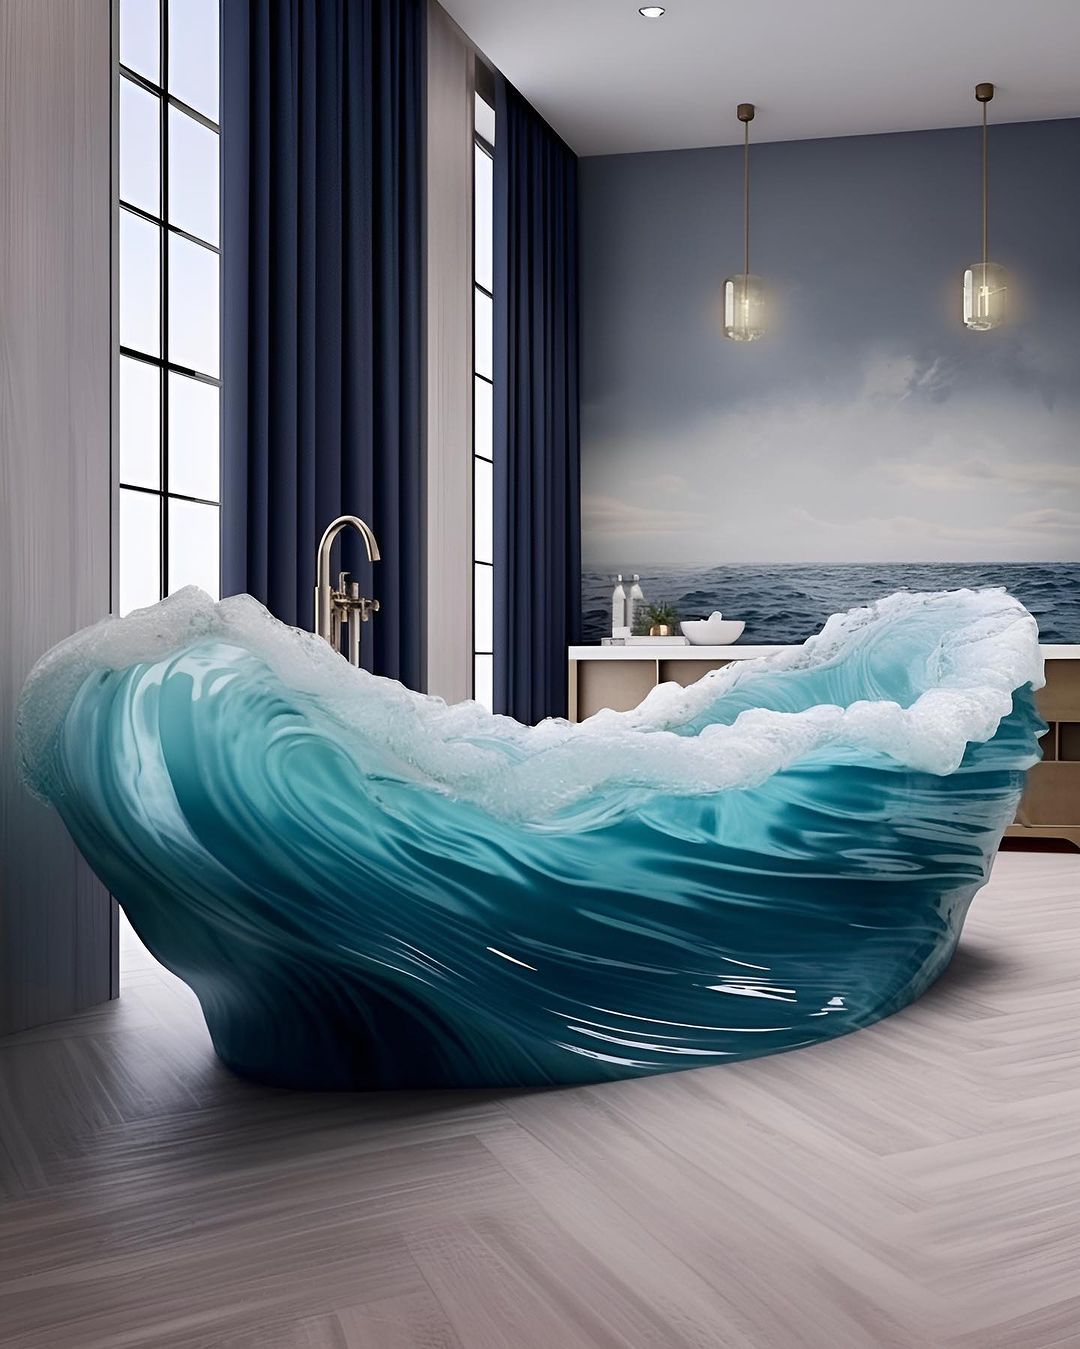 The Bathtub is Crafted with the Serenity and Elegance Reminiscent of Ocean Waves